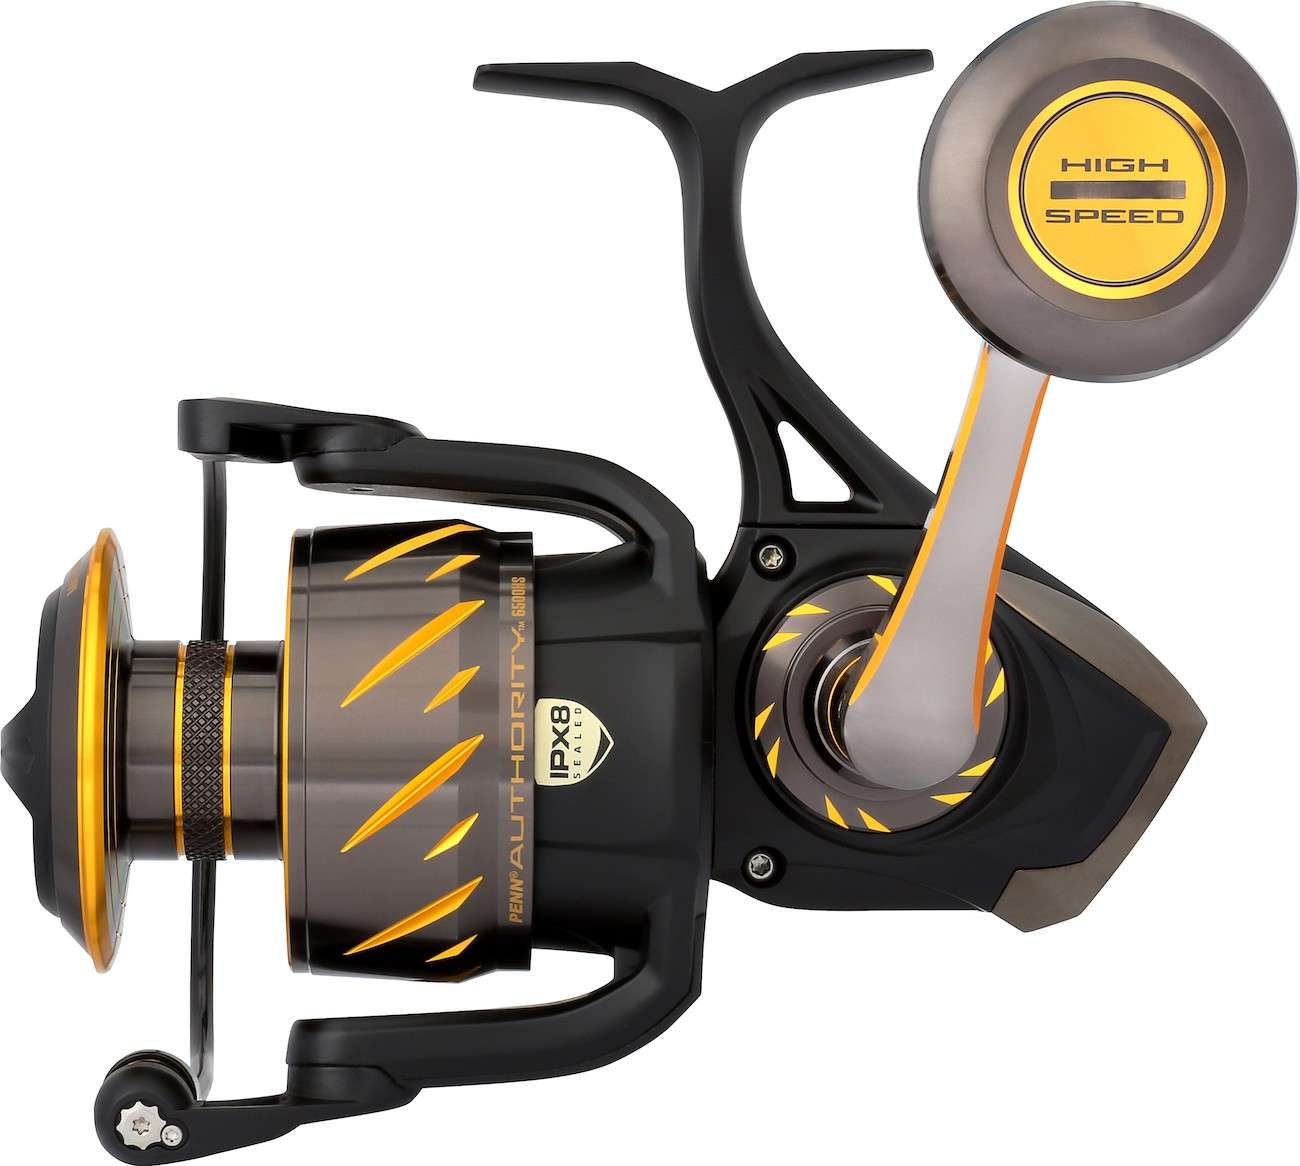 Penn Authority ATH6500HS Spinning Reel - TackleDirect